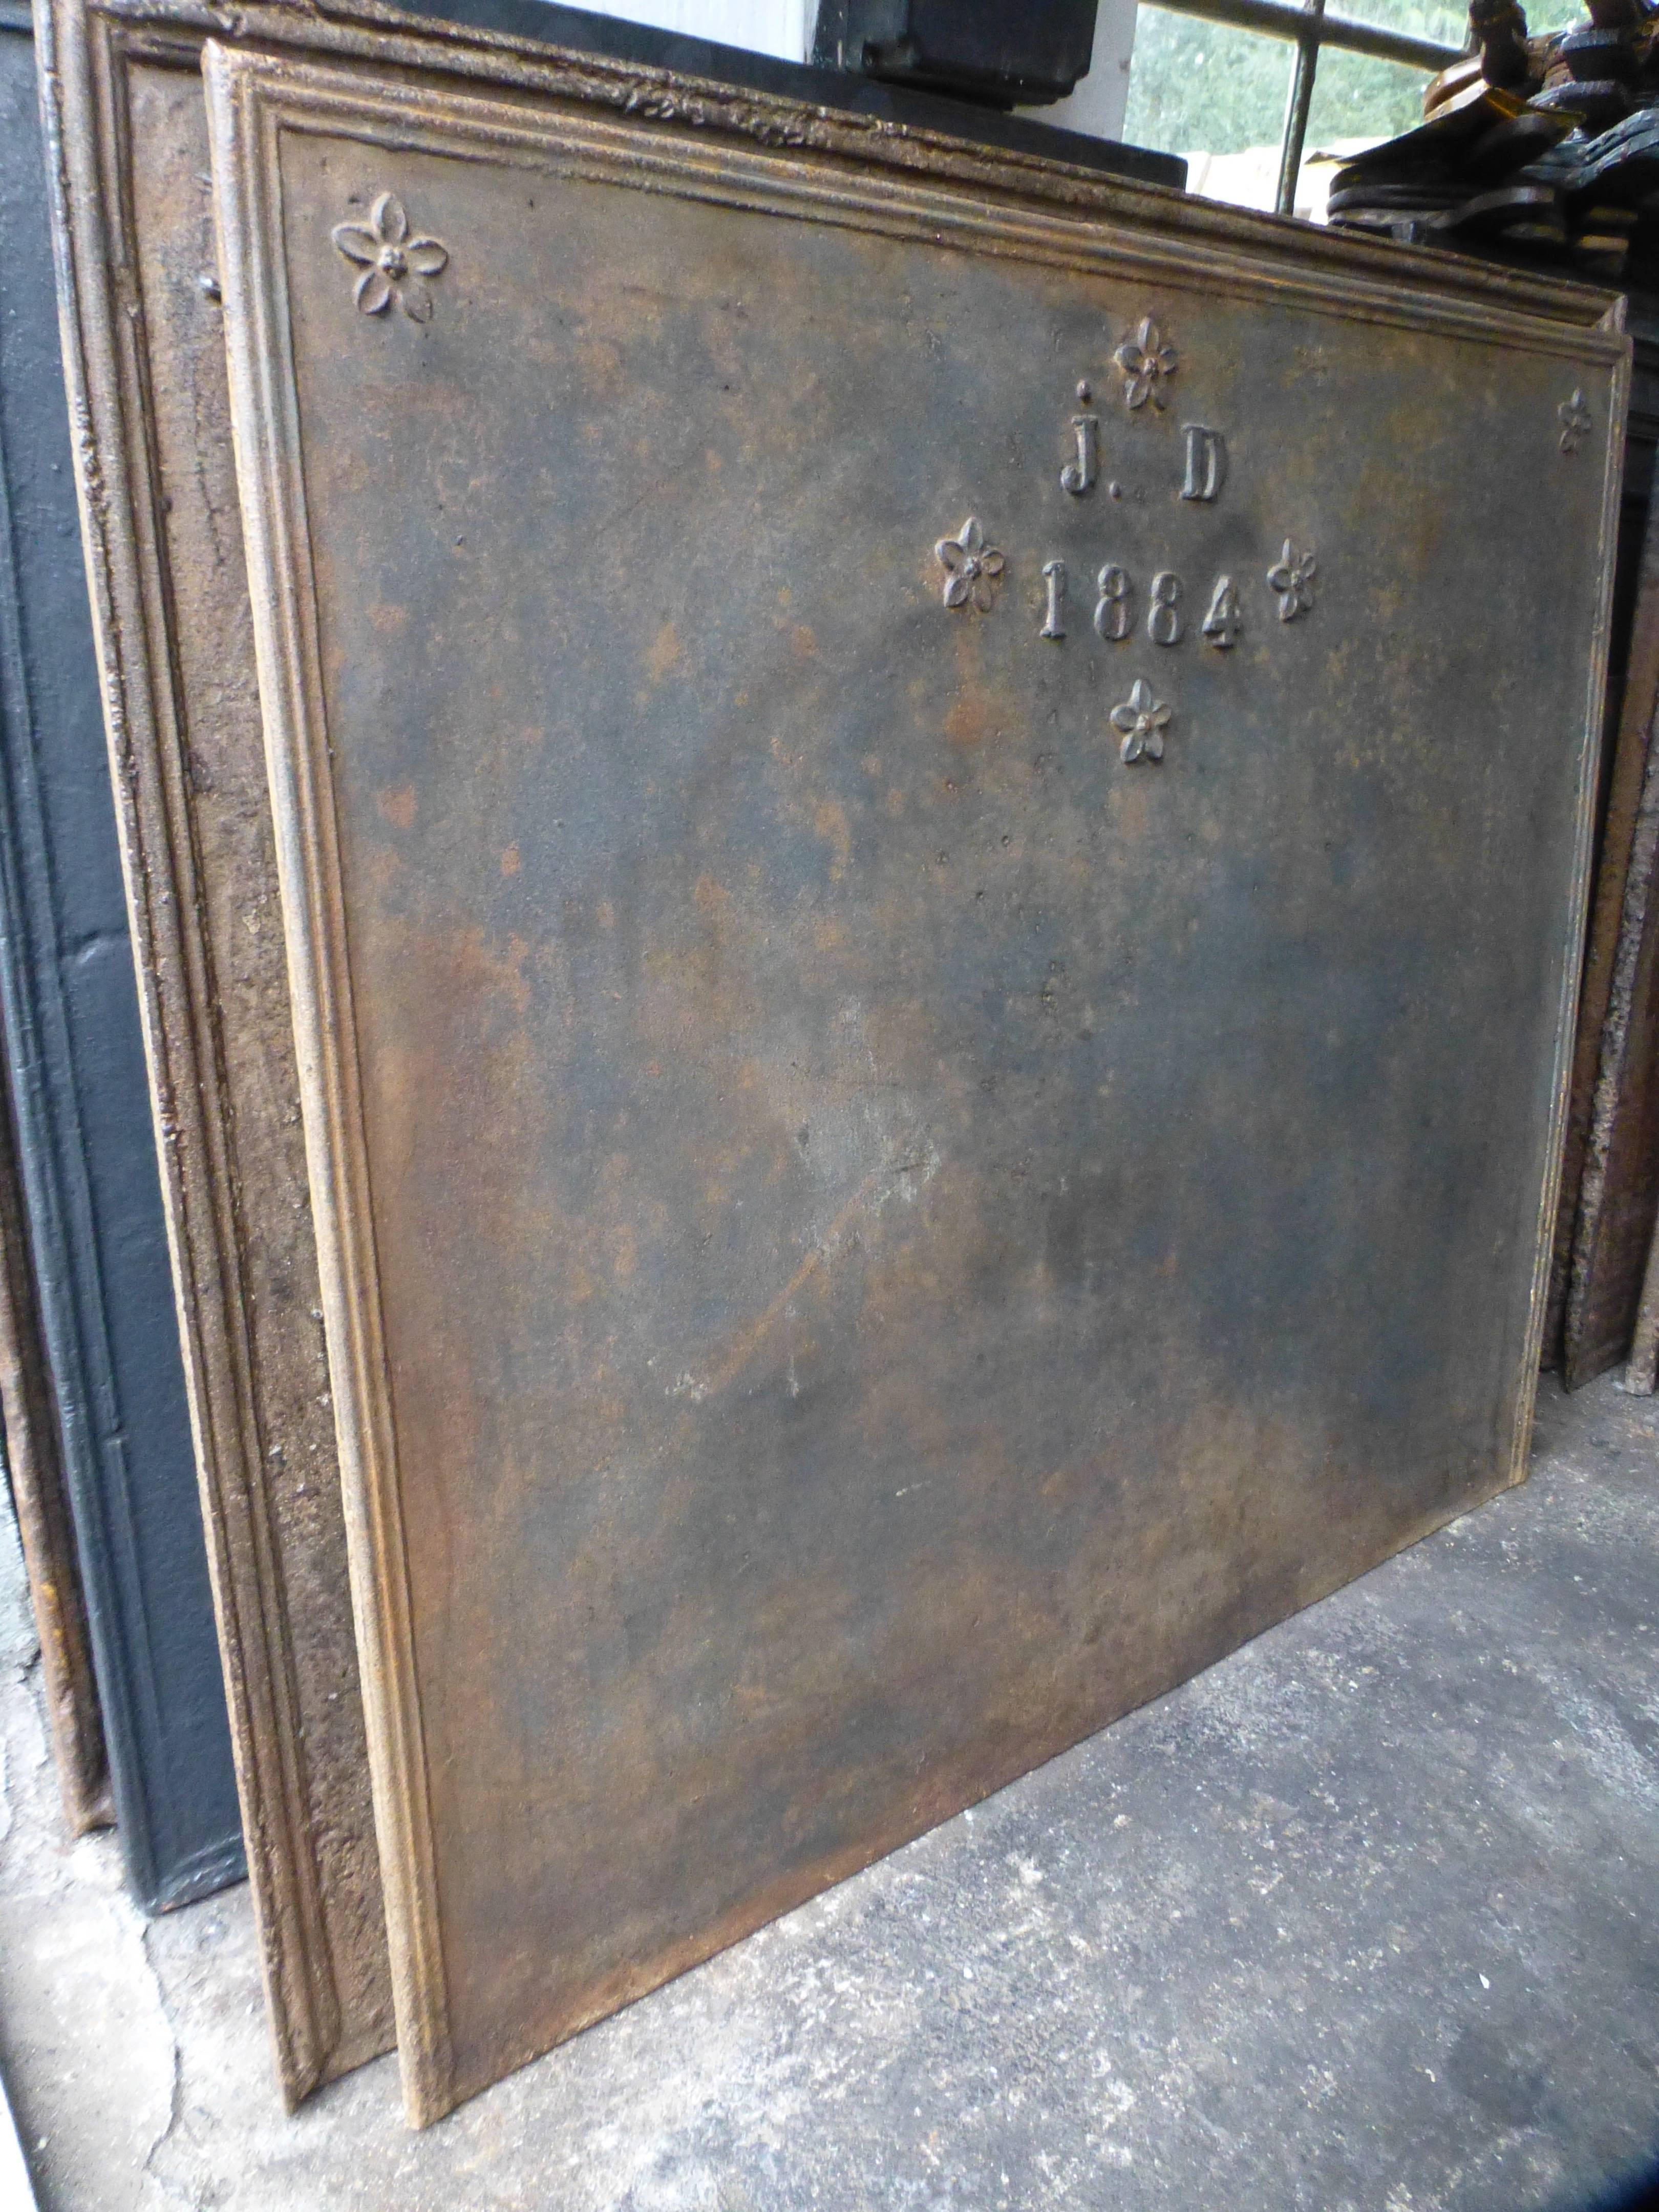 19th century French fireback with initials and the date 1884.

We have a unique and specialized collection of antique and used fireplace accessories consisting of more than 1000 listings at 1stdibs. Amongst others we always have 300+ firebacks, 250+